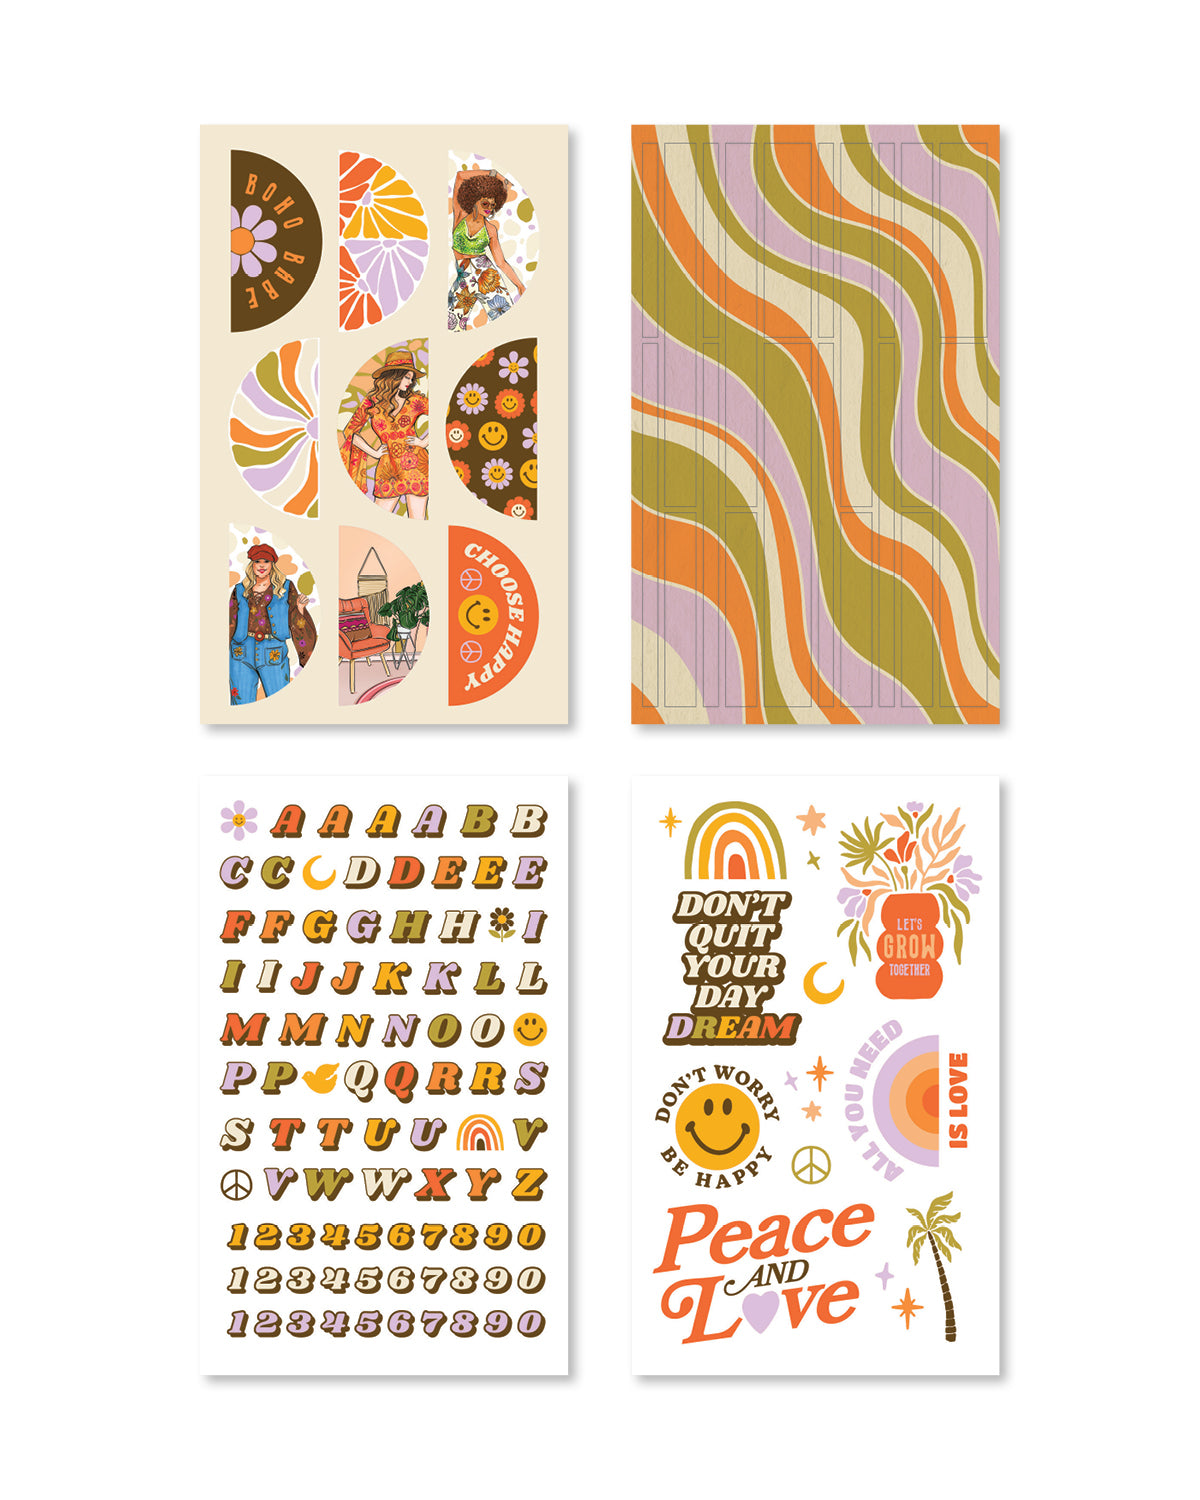 Rongrong: "Peace and Love" Planner Sticker Book